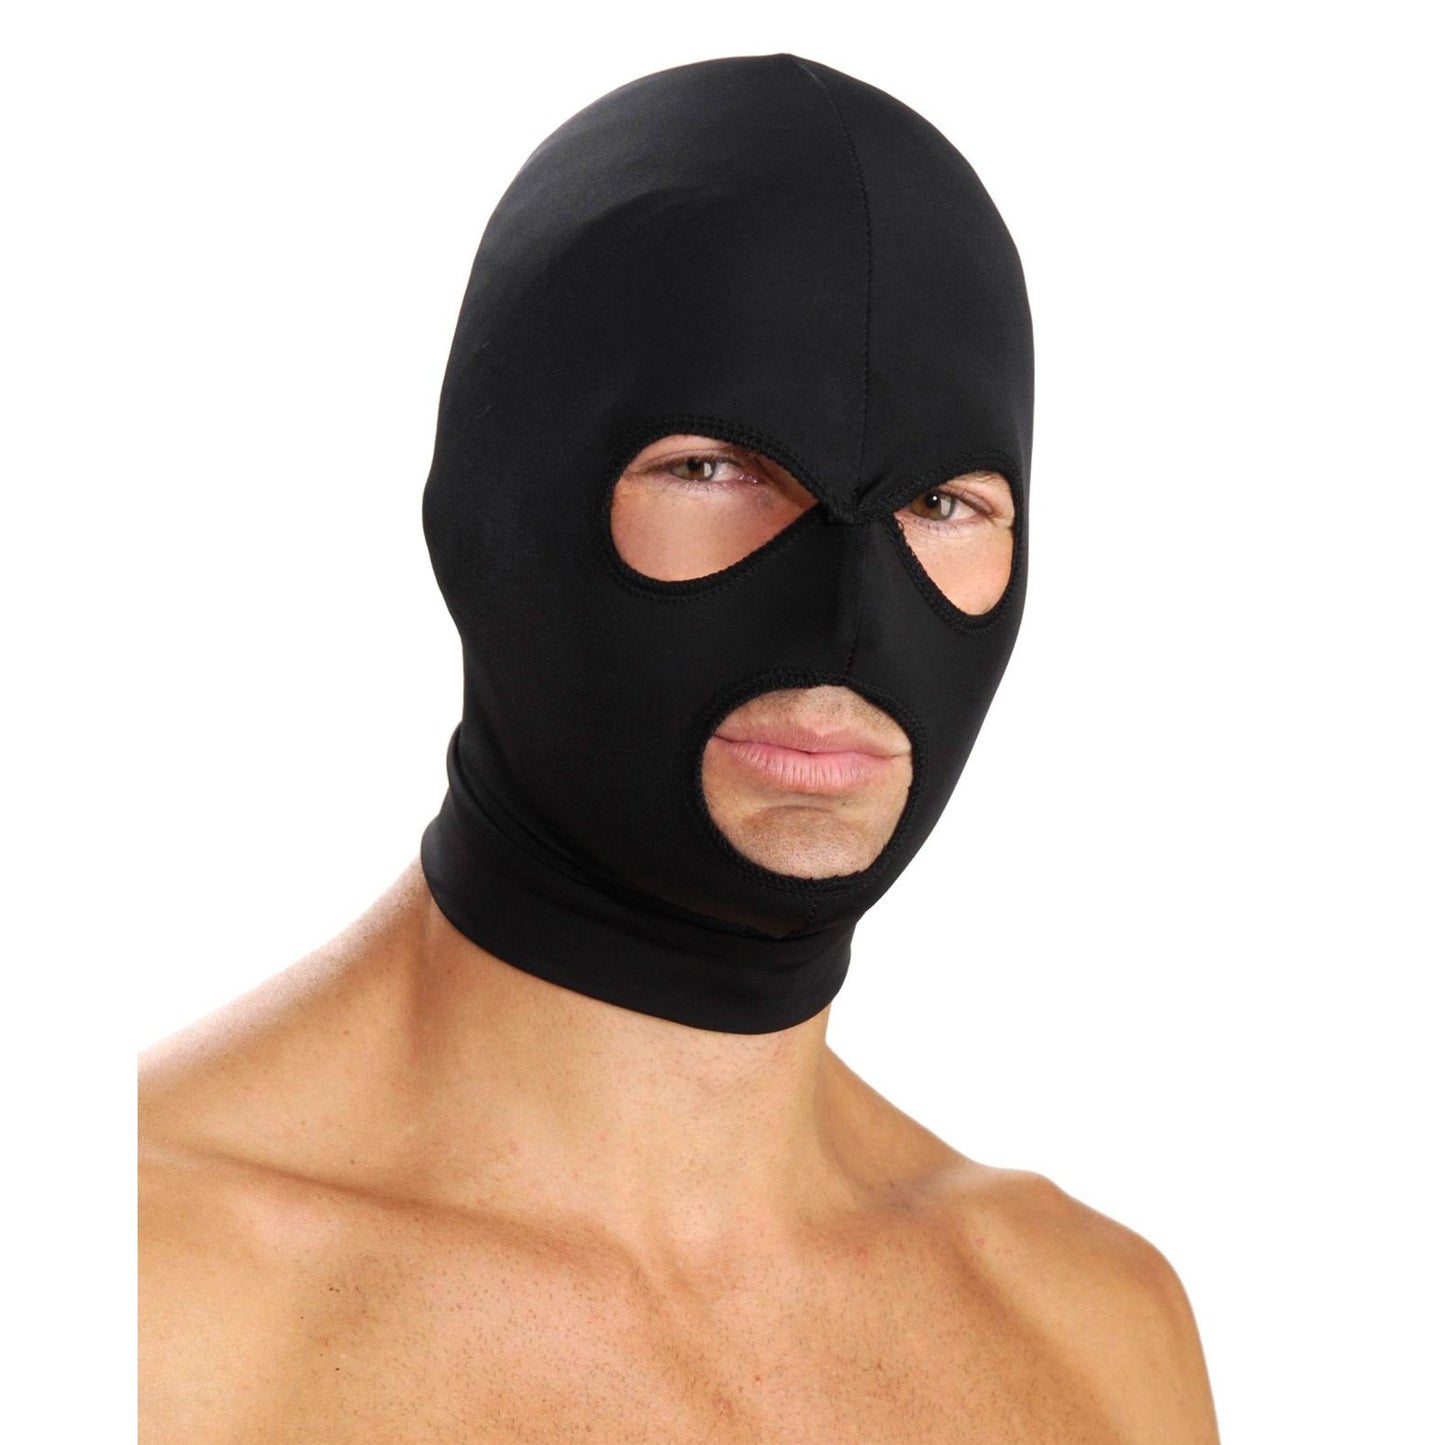 Master Series Spandex Hood with Eye & Mouth Holes